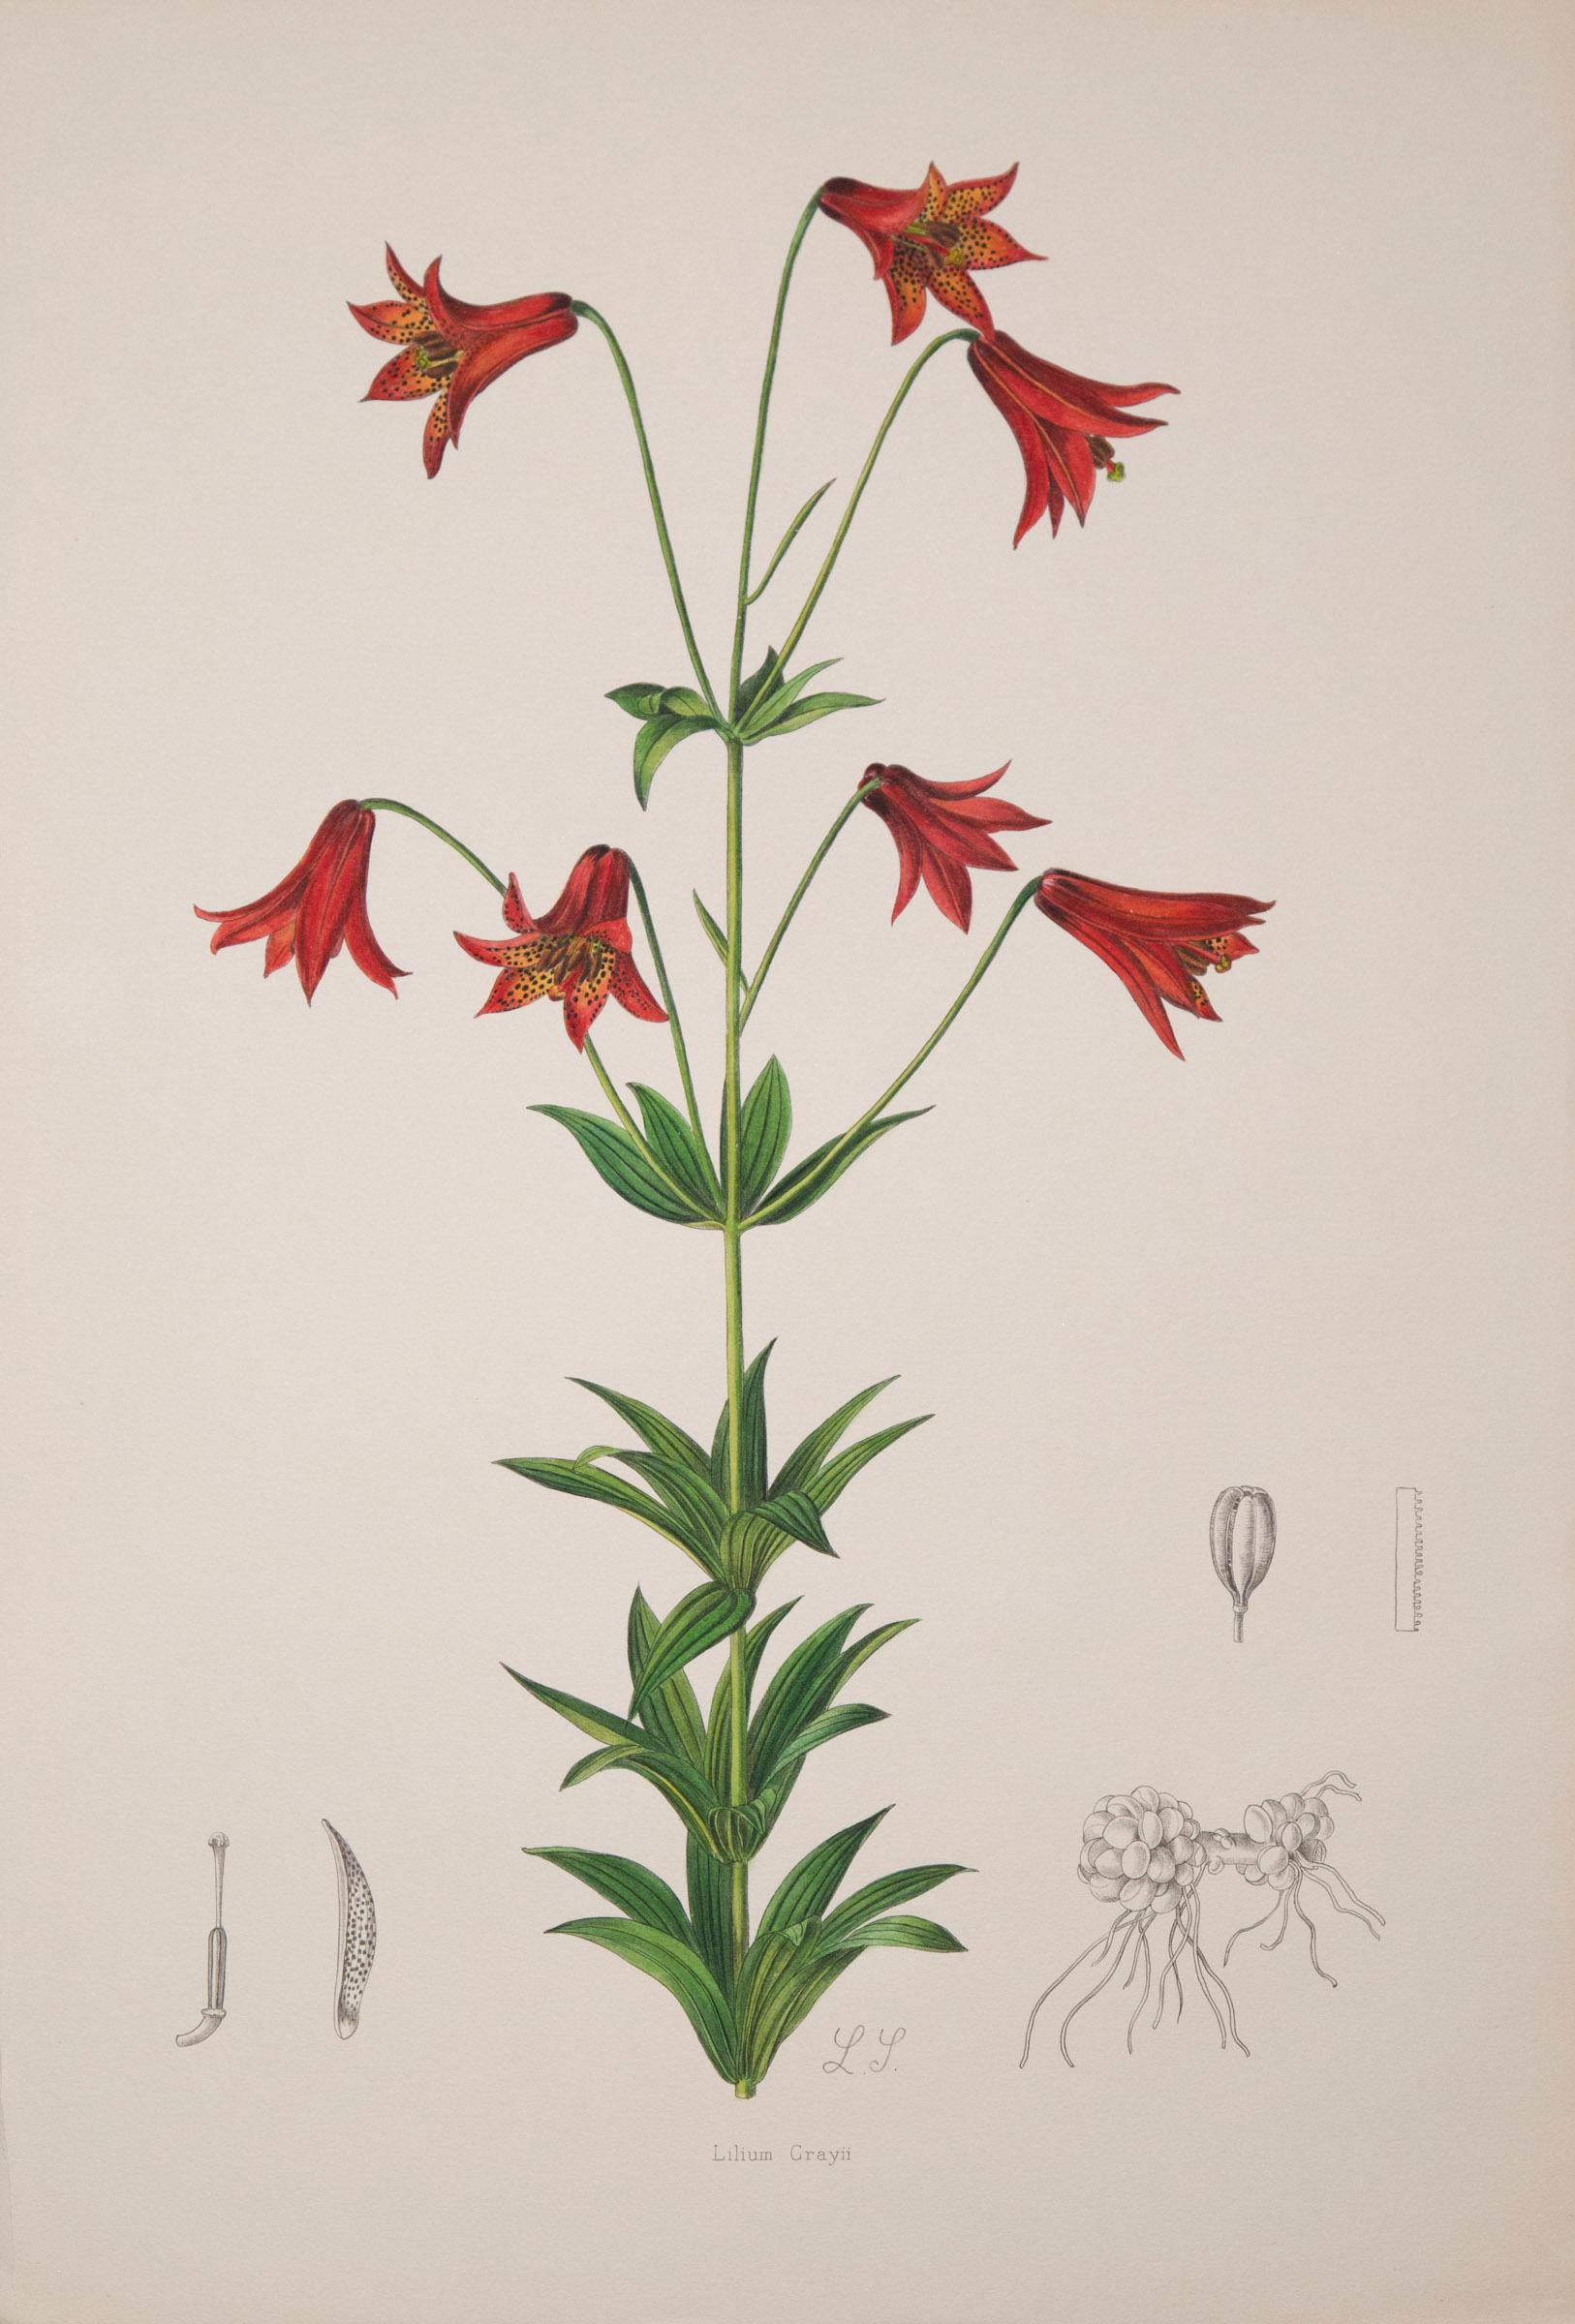 A rare set of twelve of exceptional quality 19th century botanical prints from A Monograph of the Genus Lilium, London: Taylor and Francis, 1877-1880.

Lithographs with original hand-colouring.

Why we like them
Exquisitely hand-colored,